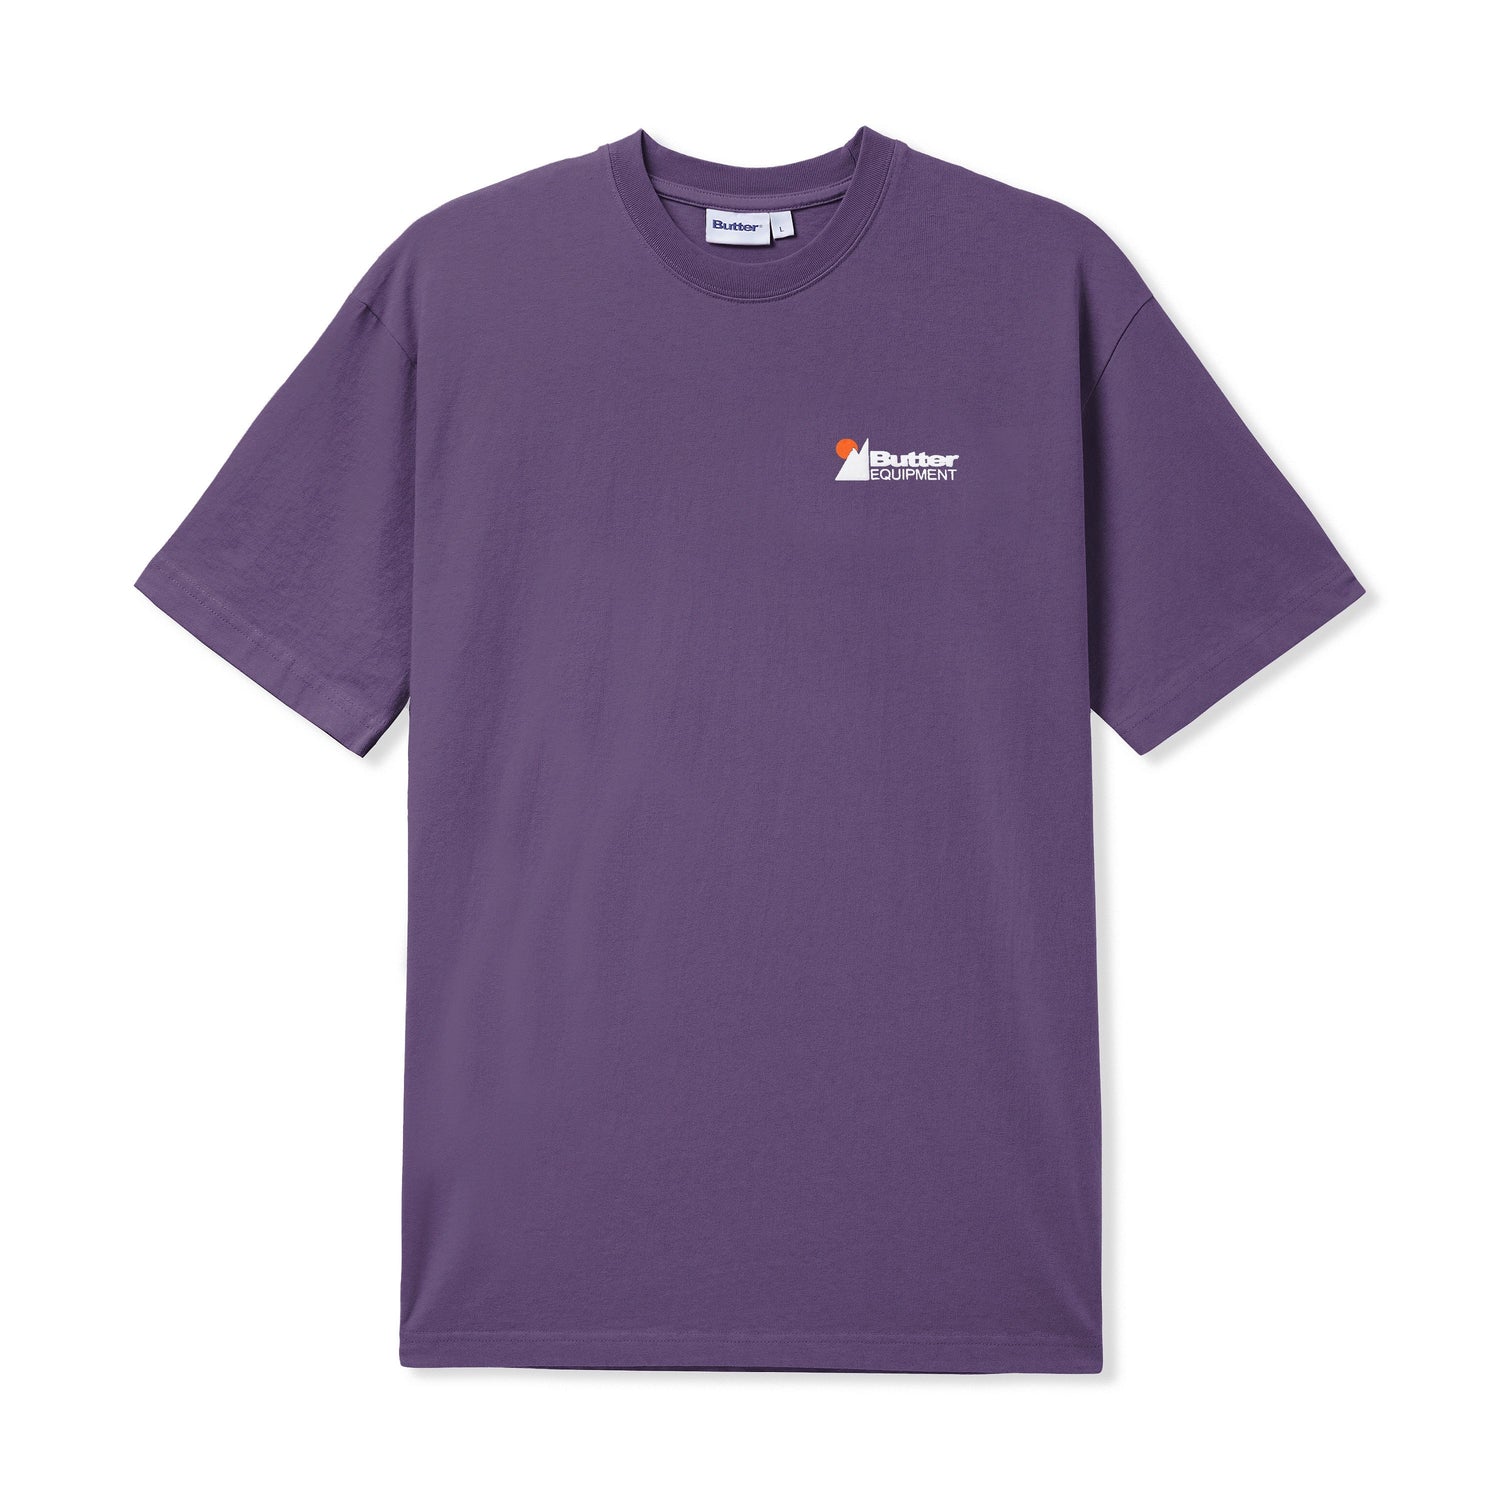 Equipment Pigment Dye Tee, Washed Mulberry